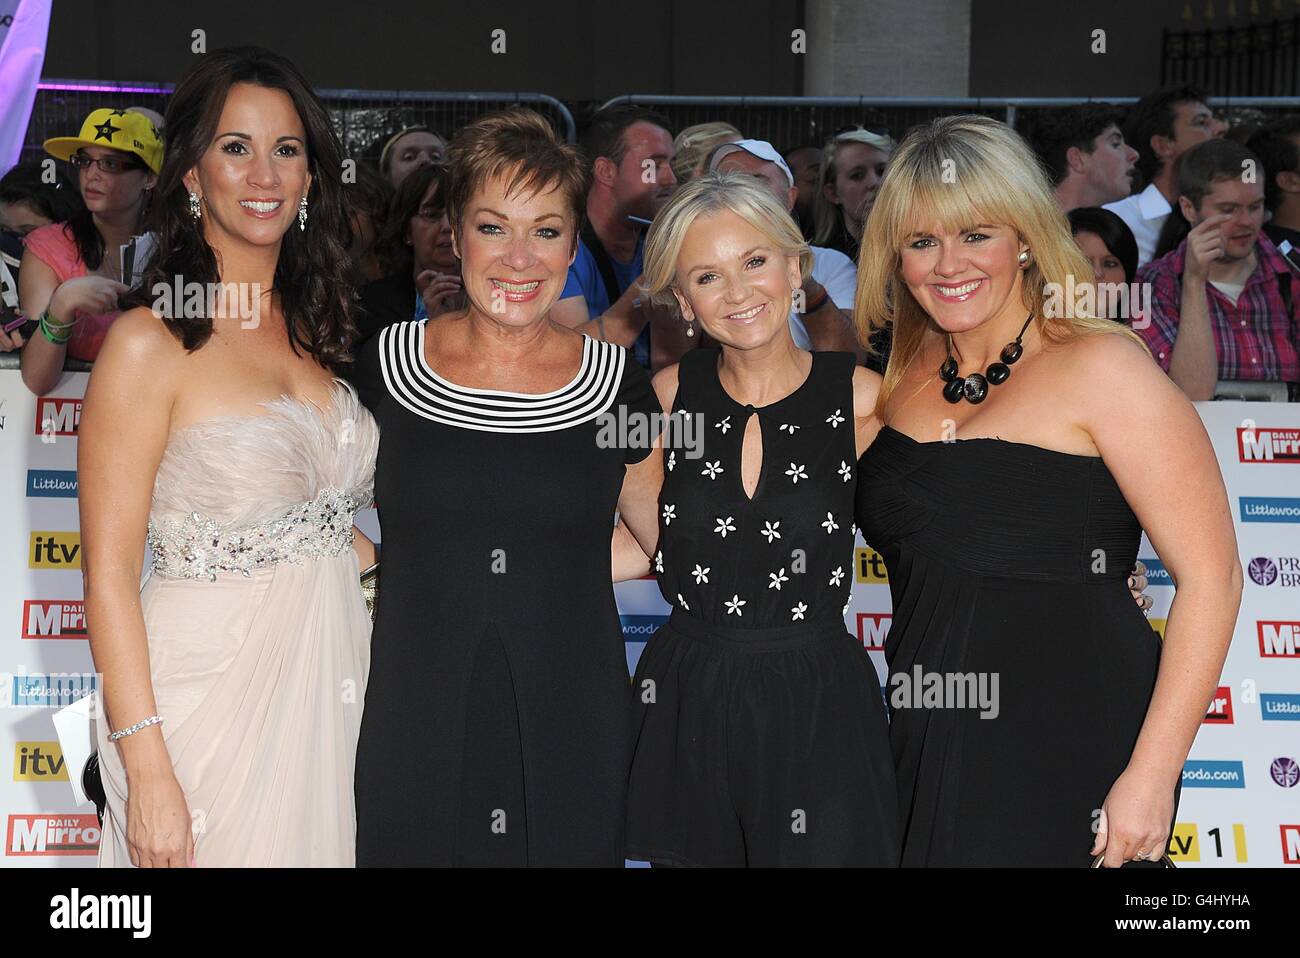 Loose Women Andrea McLean, Denise Welch, Lisa Maxwell and Sally Lindsay arriving for the Pride of Britain awards at the Grosvenor House Hotel, London. Stock Photo